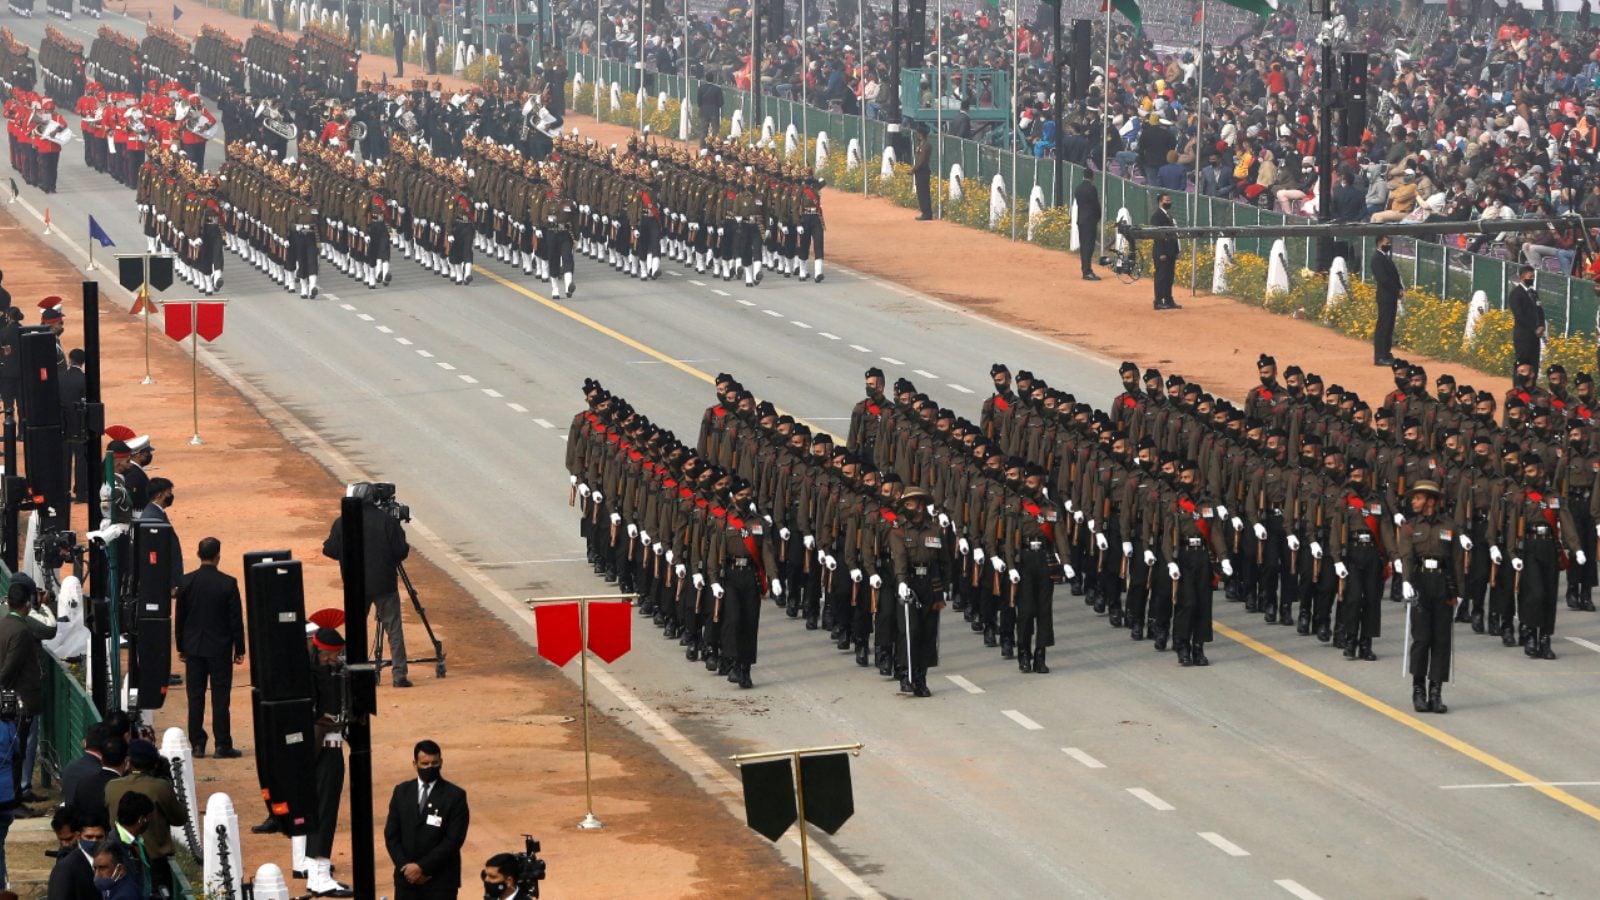 Republic Day 2022: How To Watch Republic Day Parade Live Online And On TV